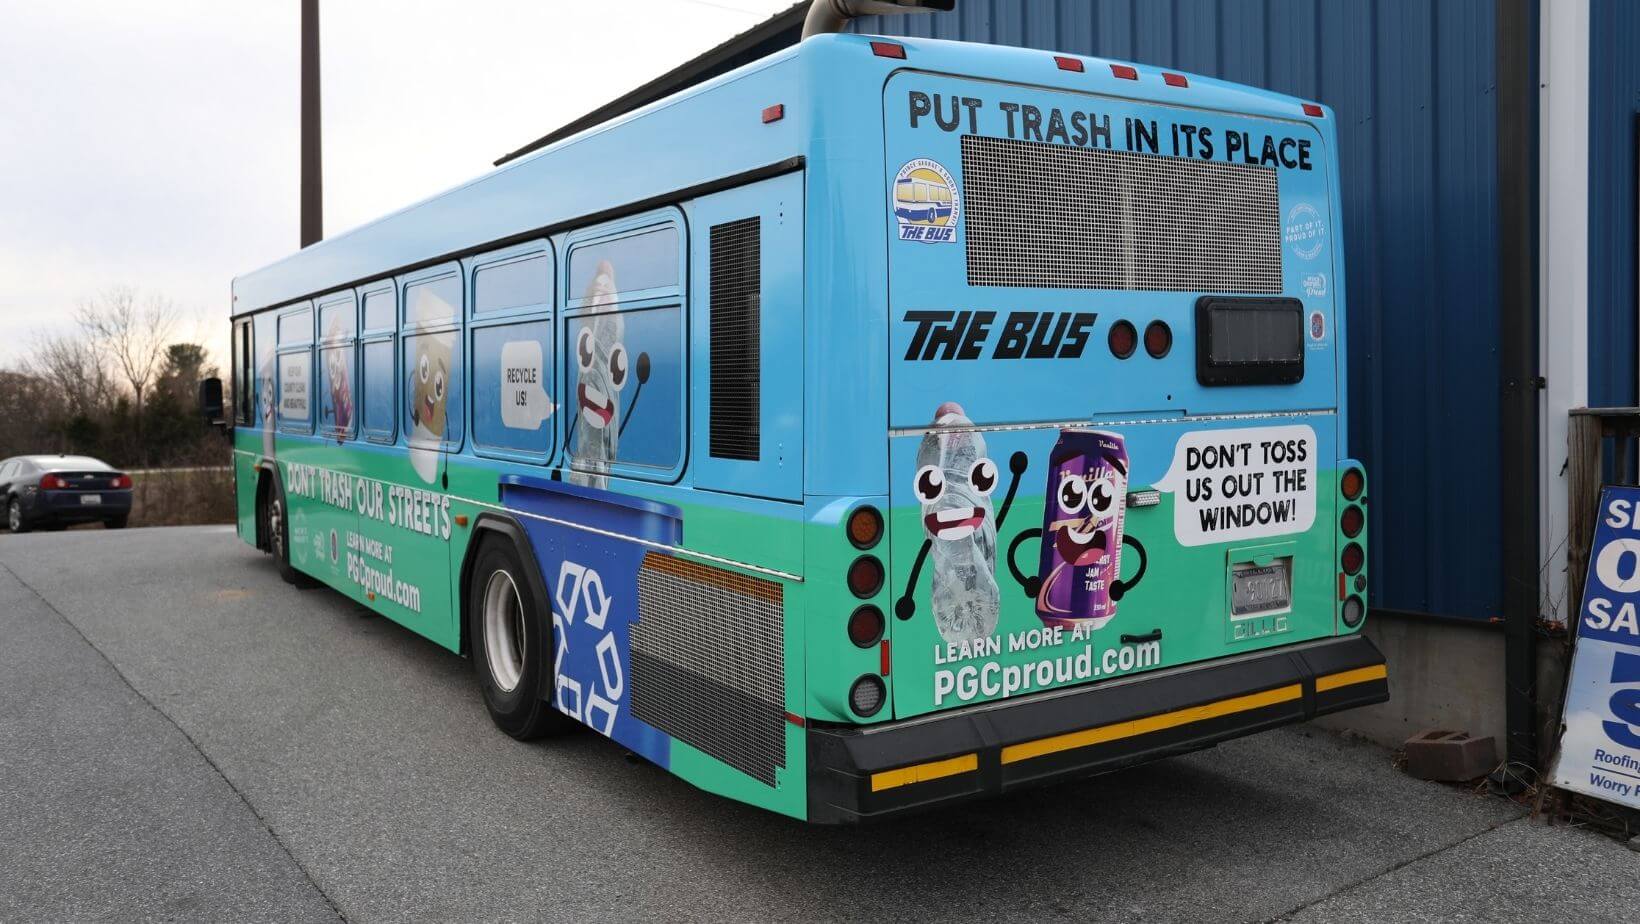 blue-and-green-bus-wrap-advertising-recycling-pg-county-maryland